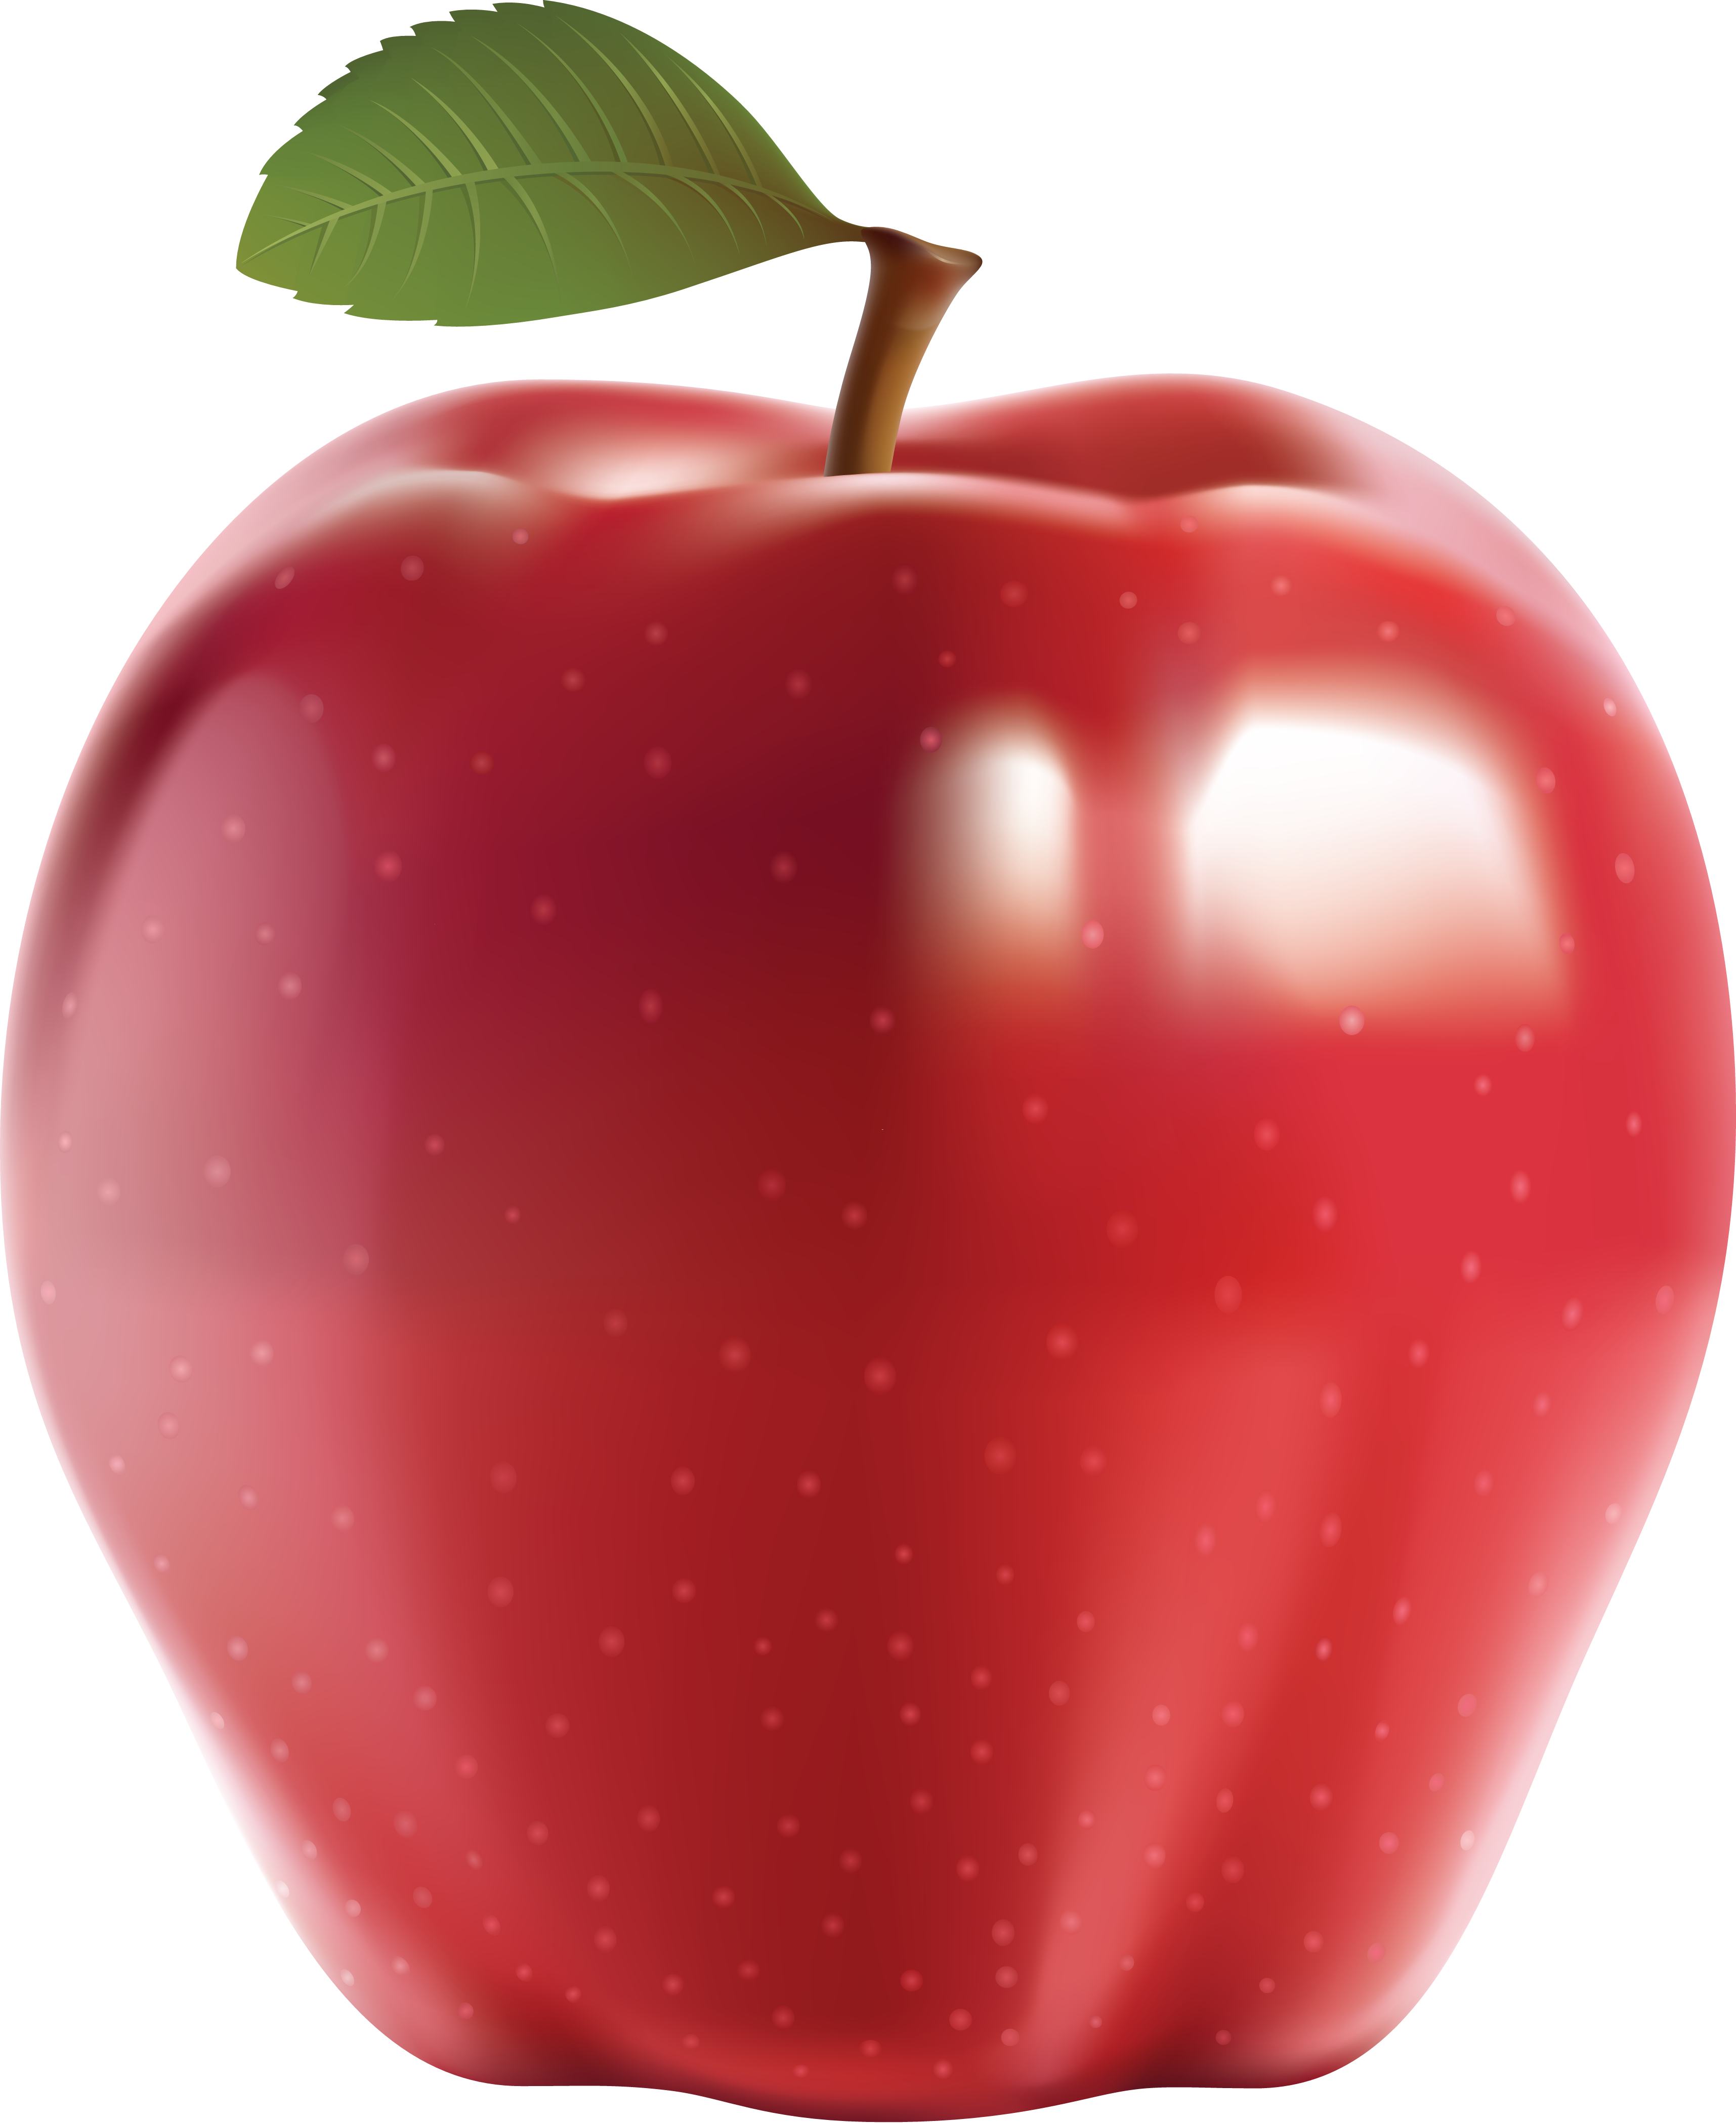 Red Apple Animated PNG Image